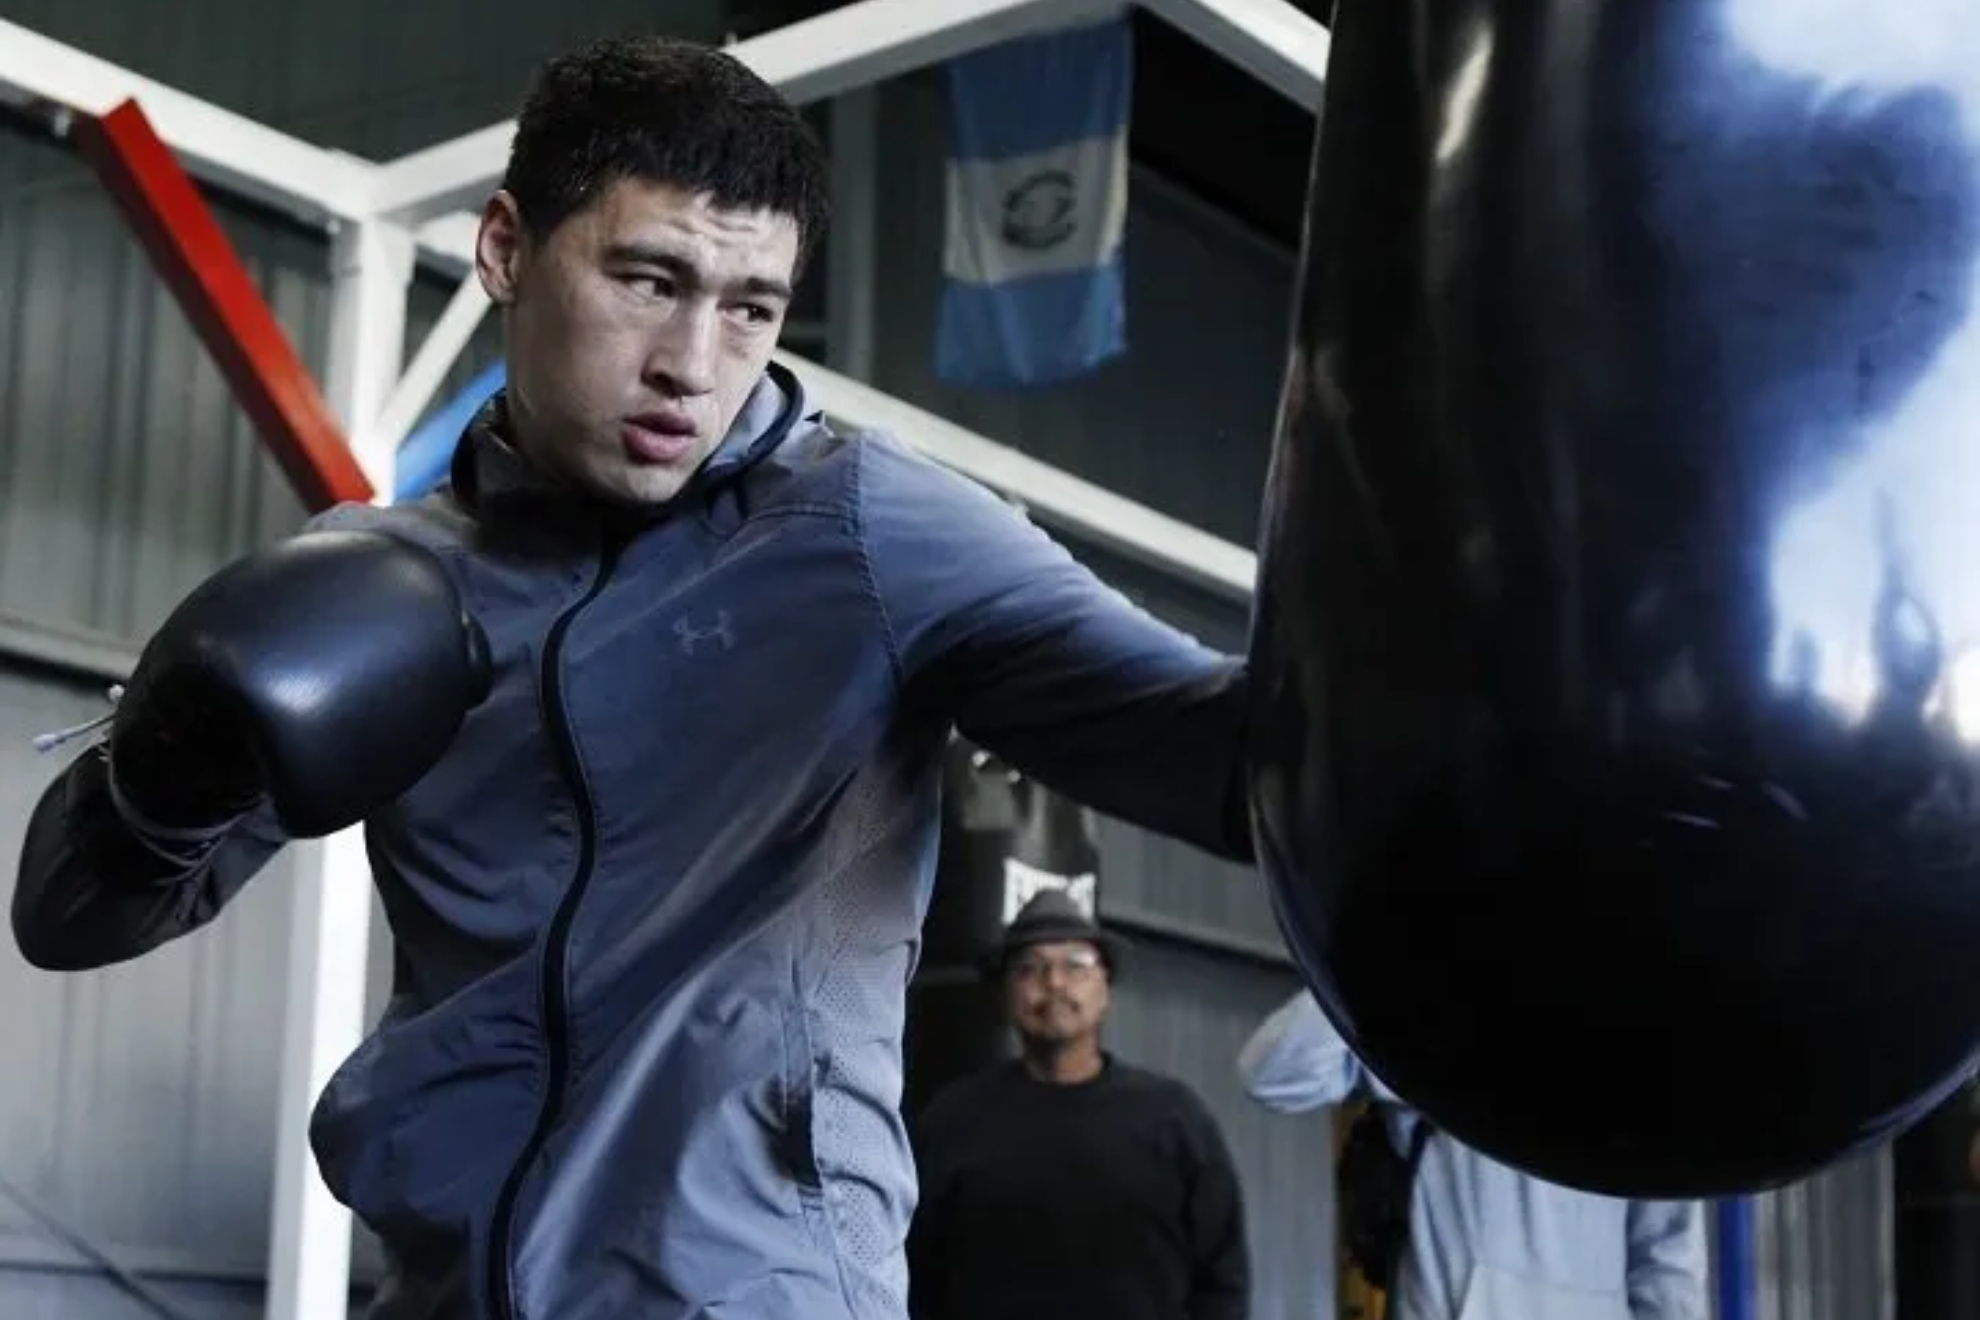 Dmitry Bivol is back at the gym in Russia